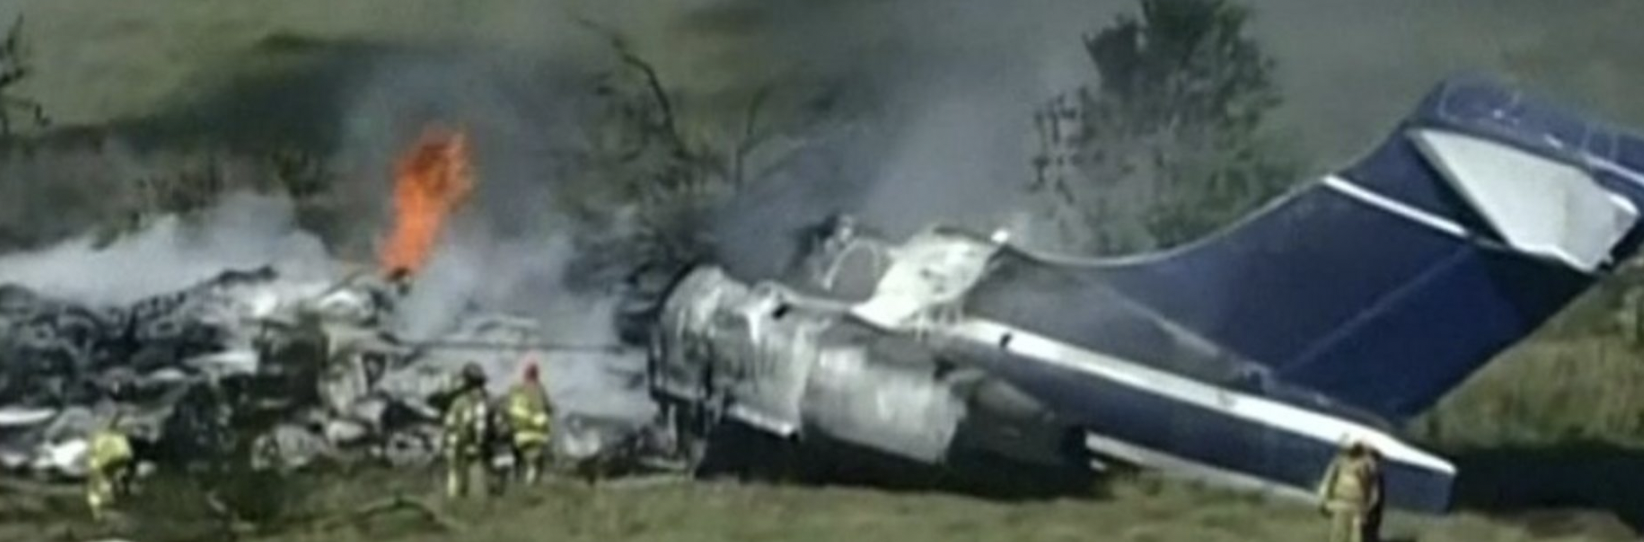 Plane crashed soon after takeoff but all 21 people on board escapes